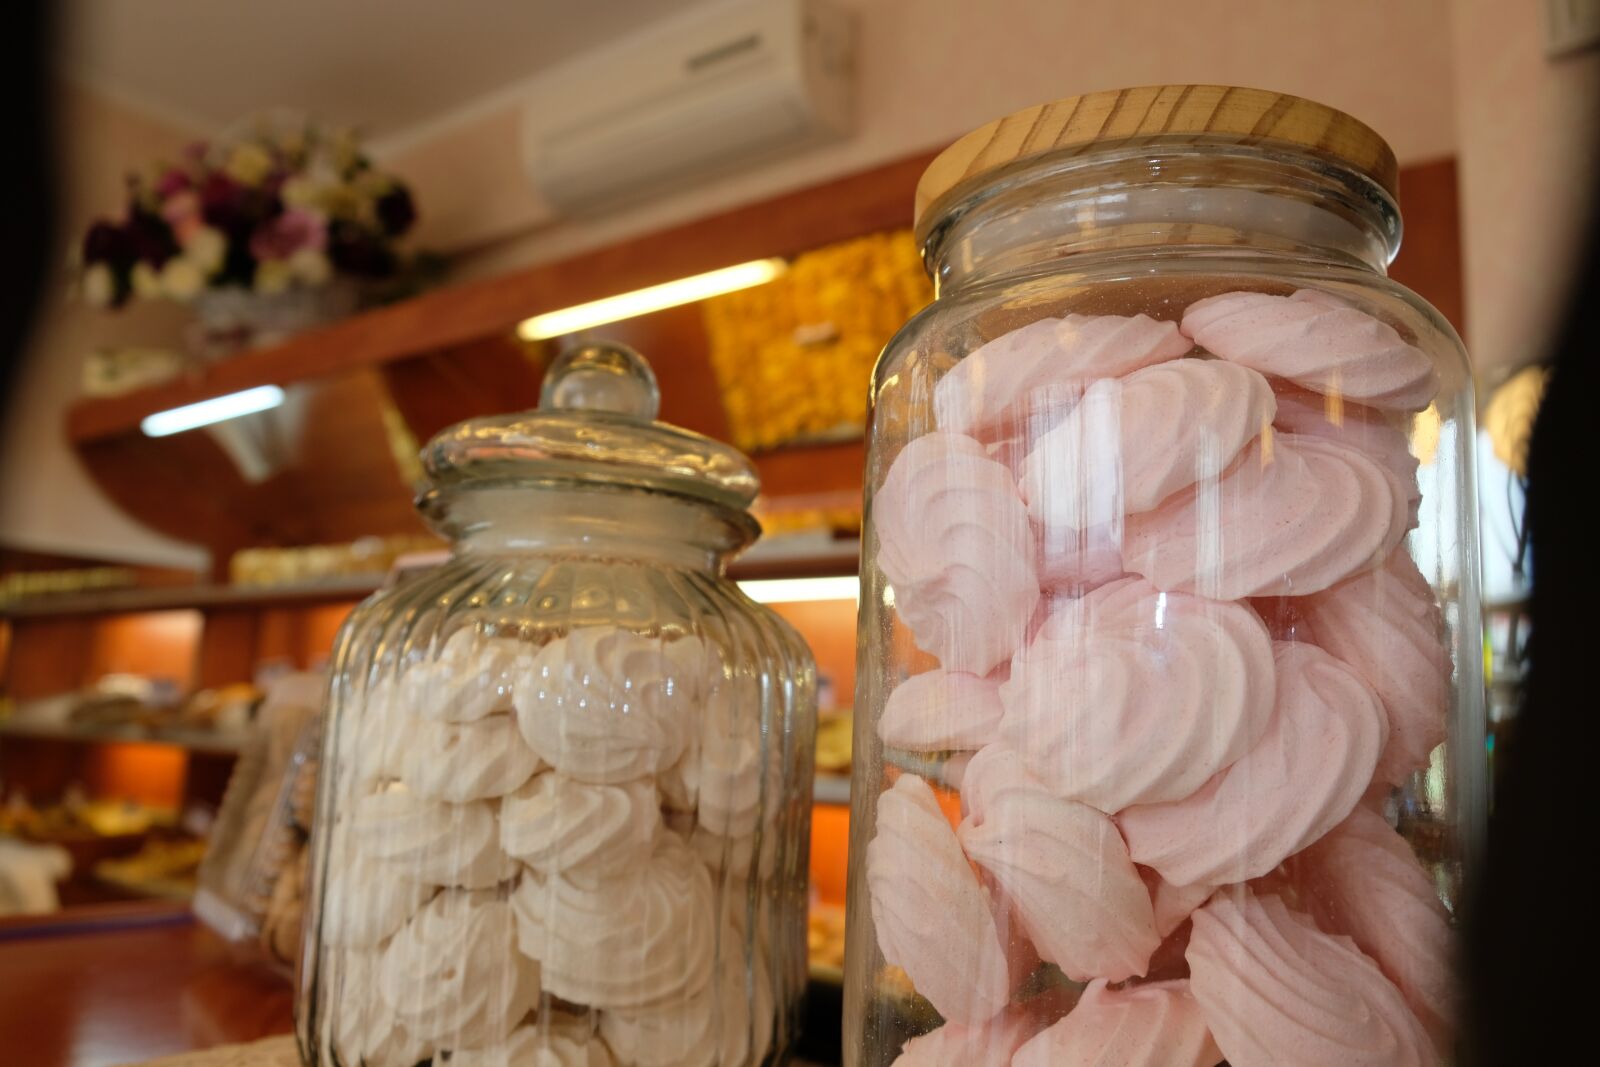 Fujifilm X-T20 sample photo. Pastry shop, sweets, production photography